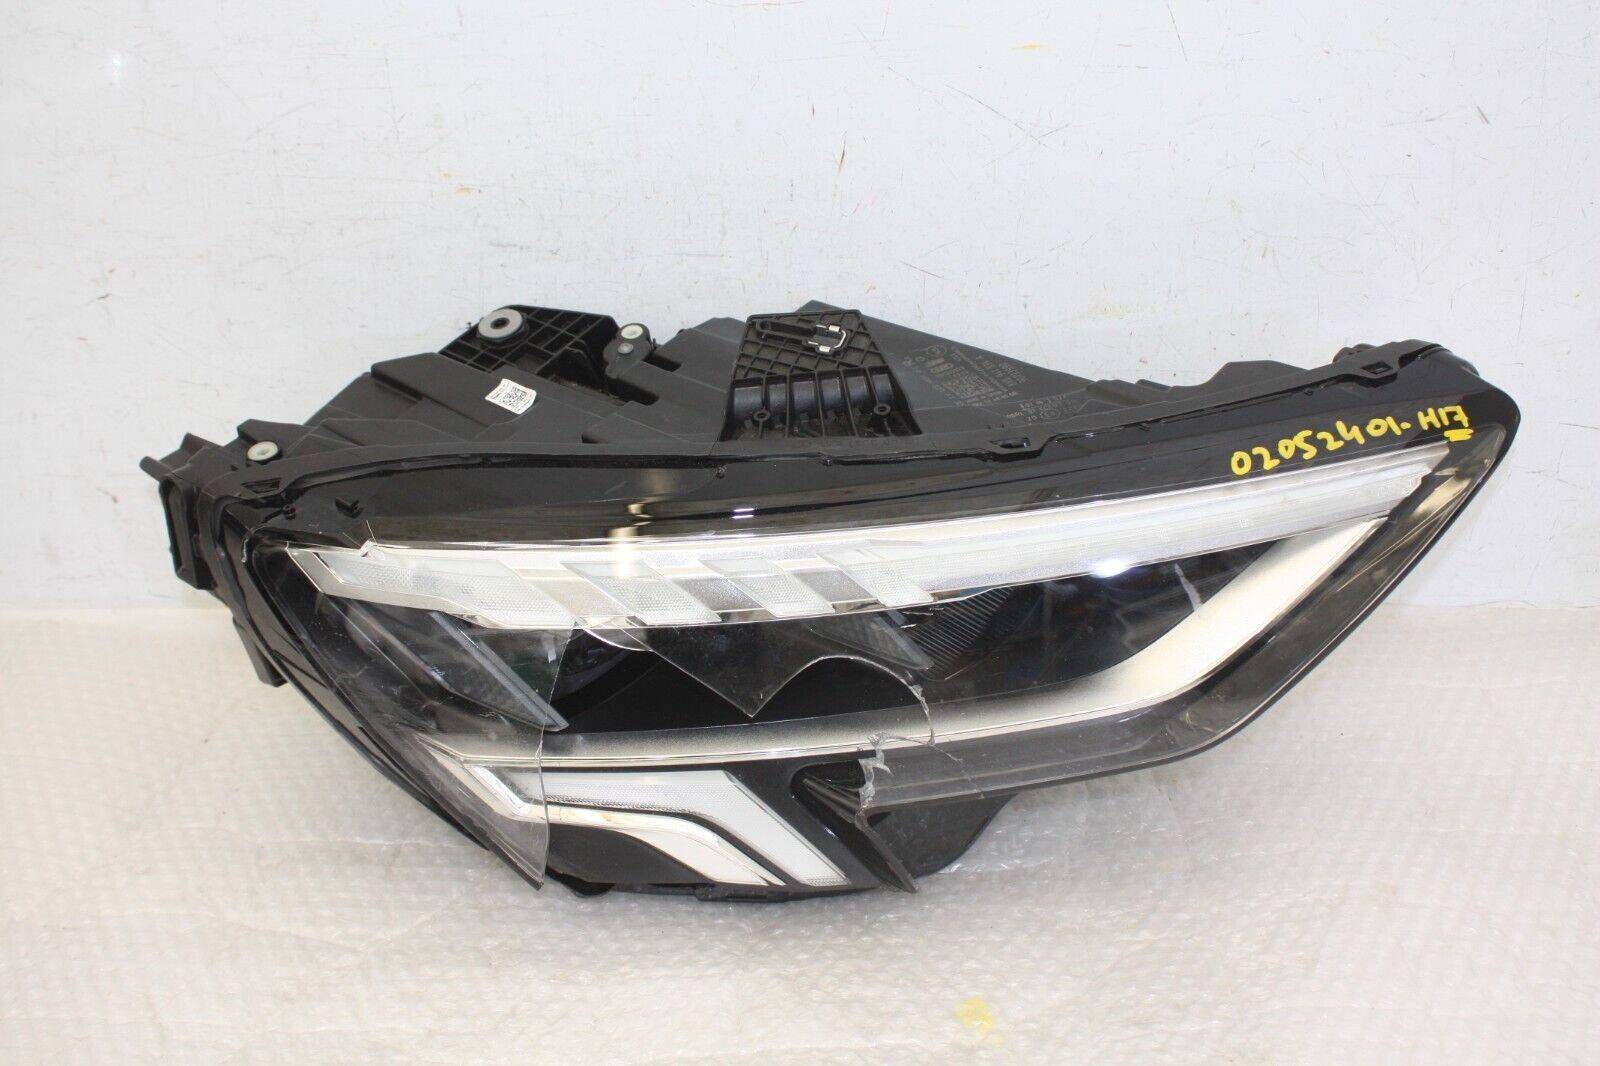 Audi S3 Right Side LED Headlight 8Y0941034A Genuine LENS DAMAGED 176361077523